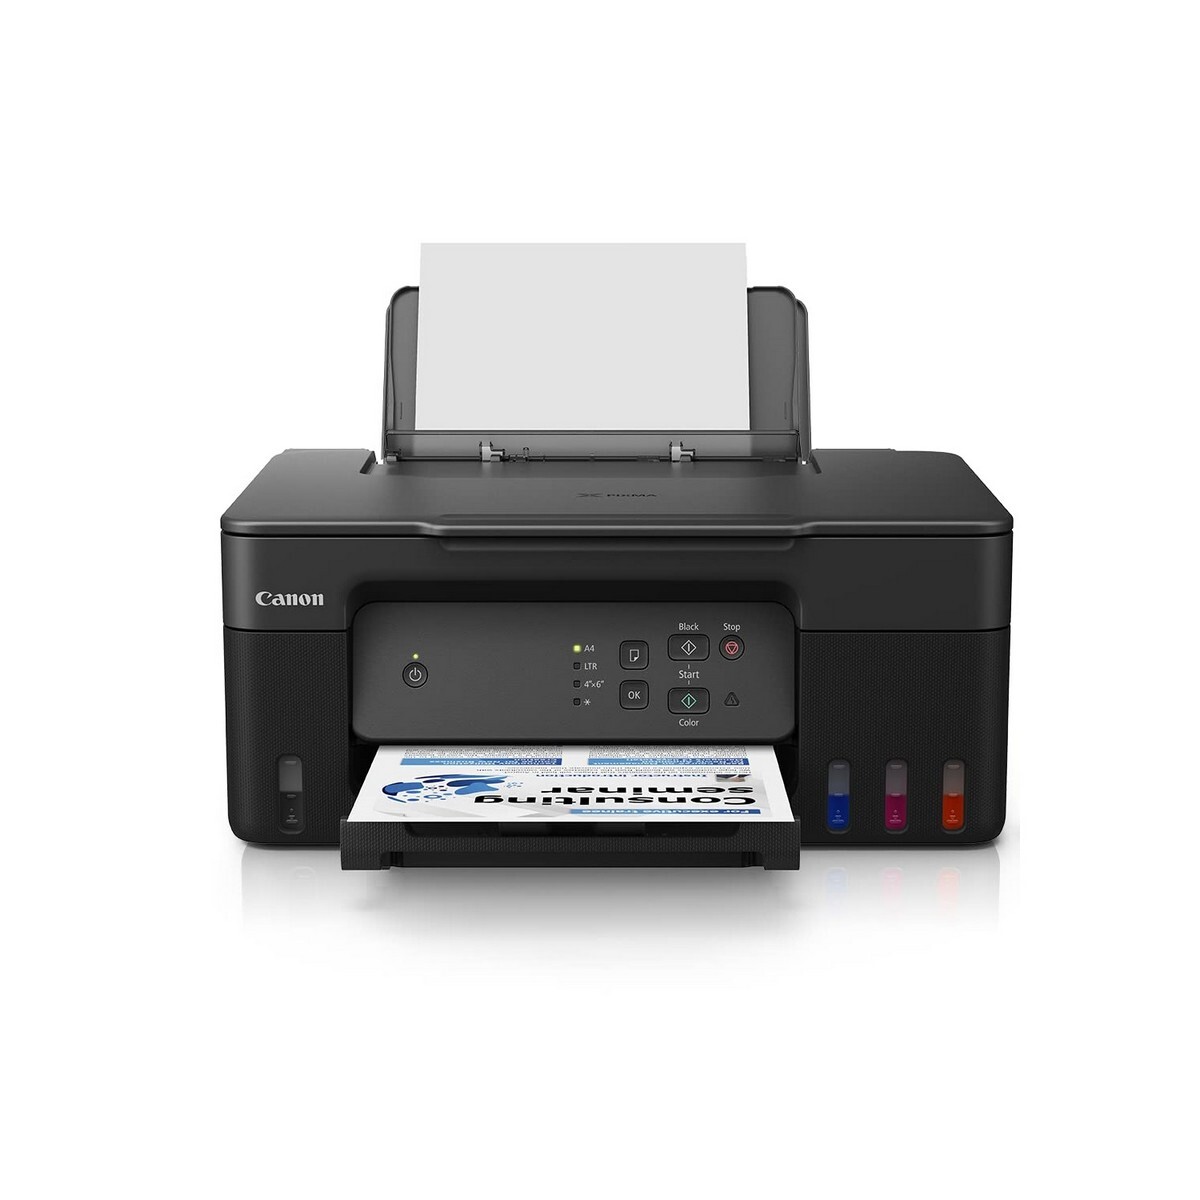 Canon Pixma G2730 All-in-one Ink tank Printer